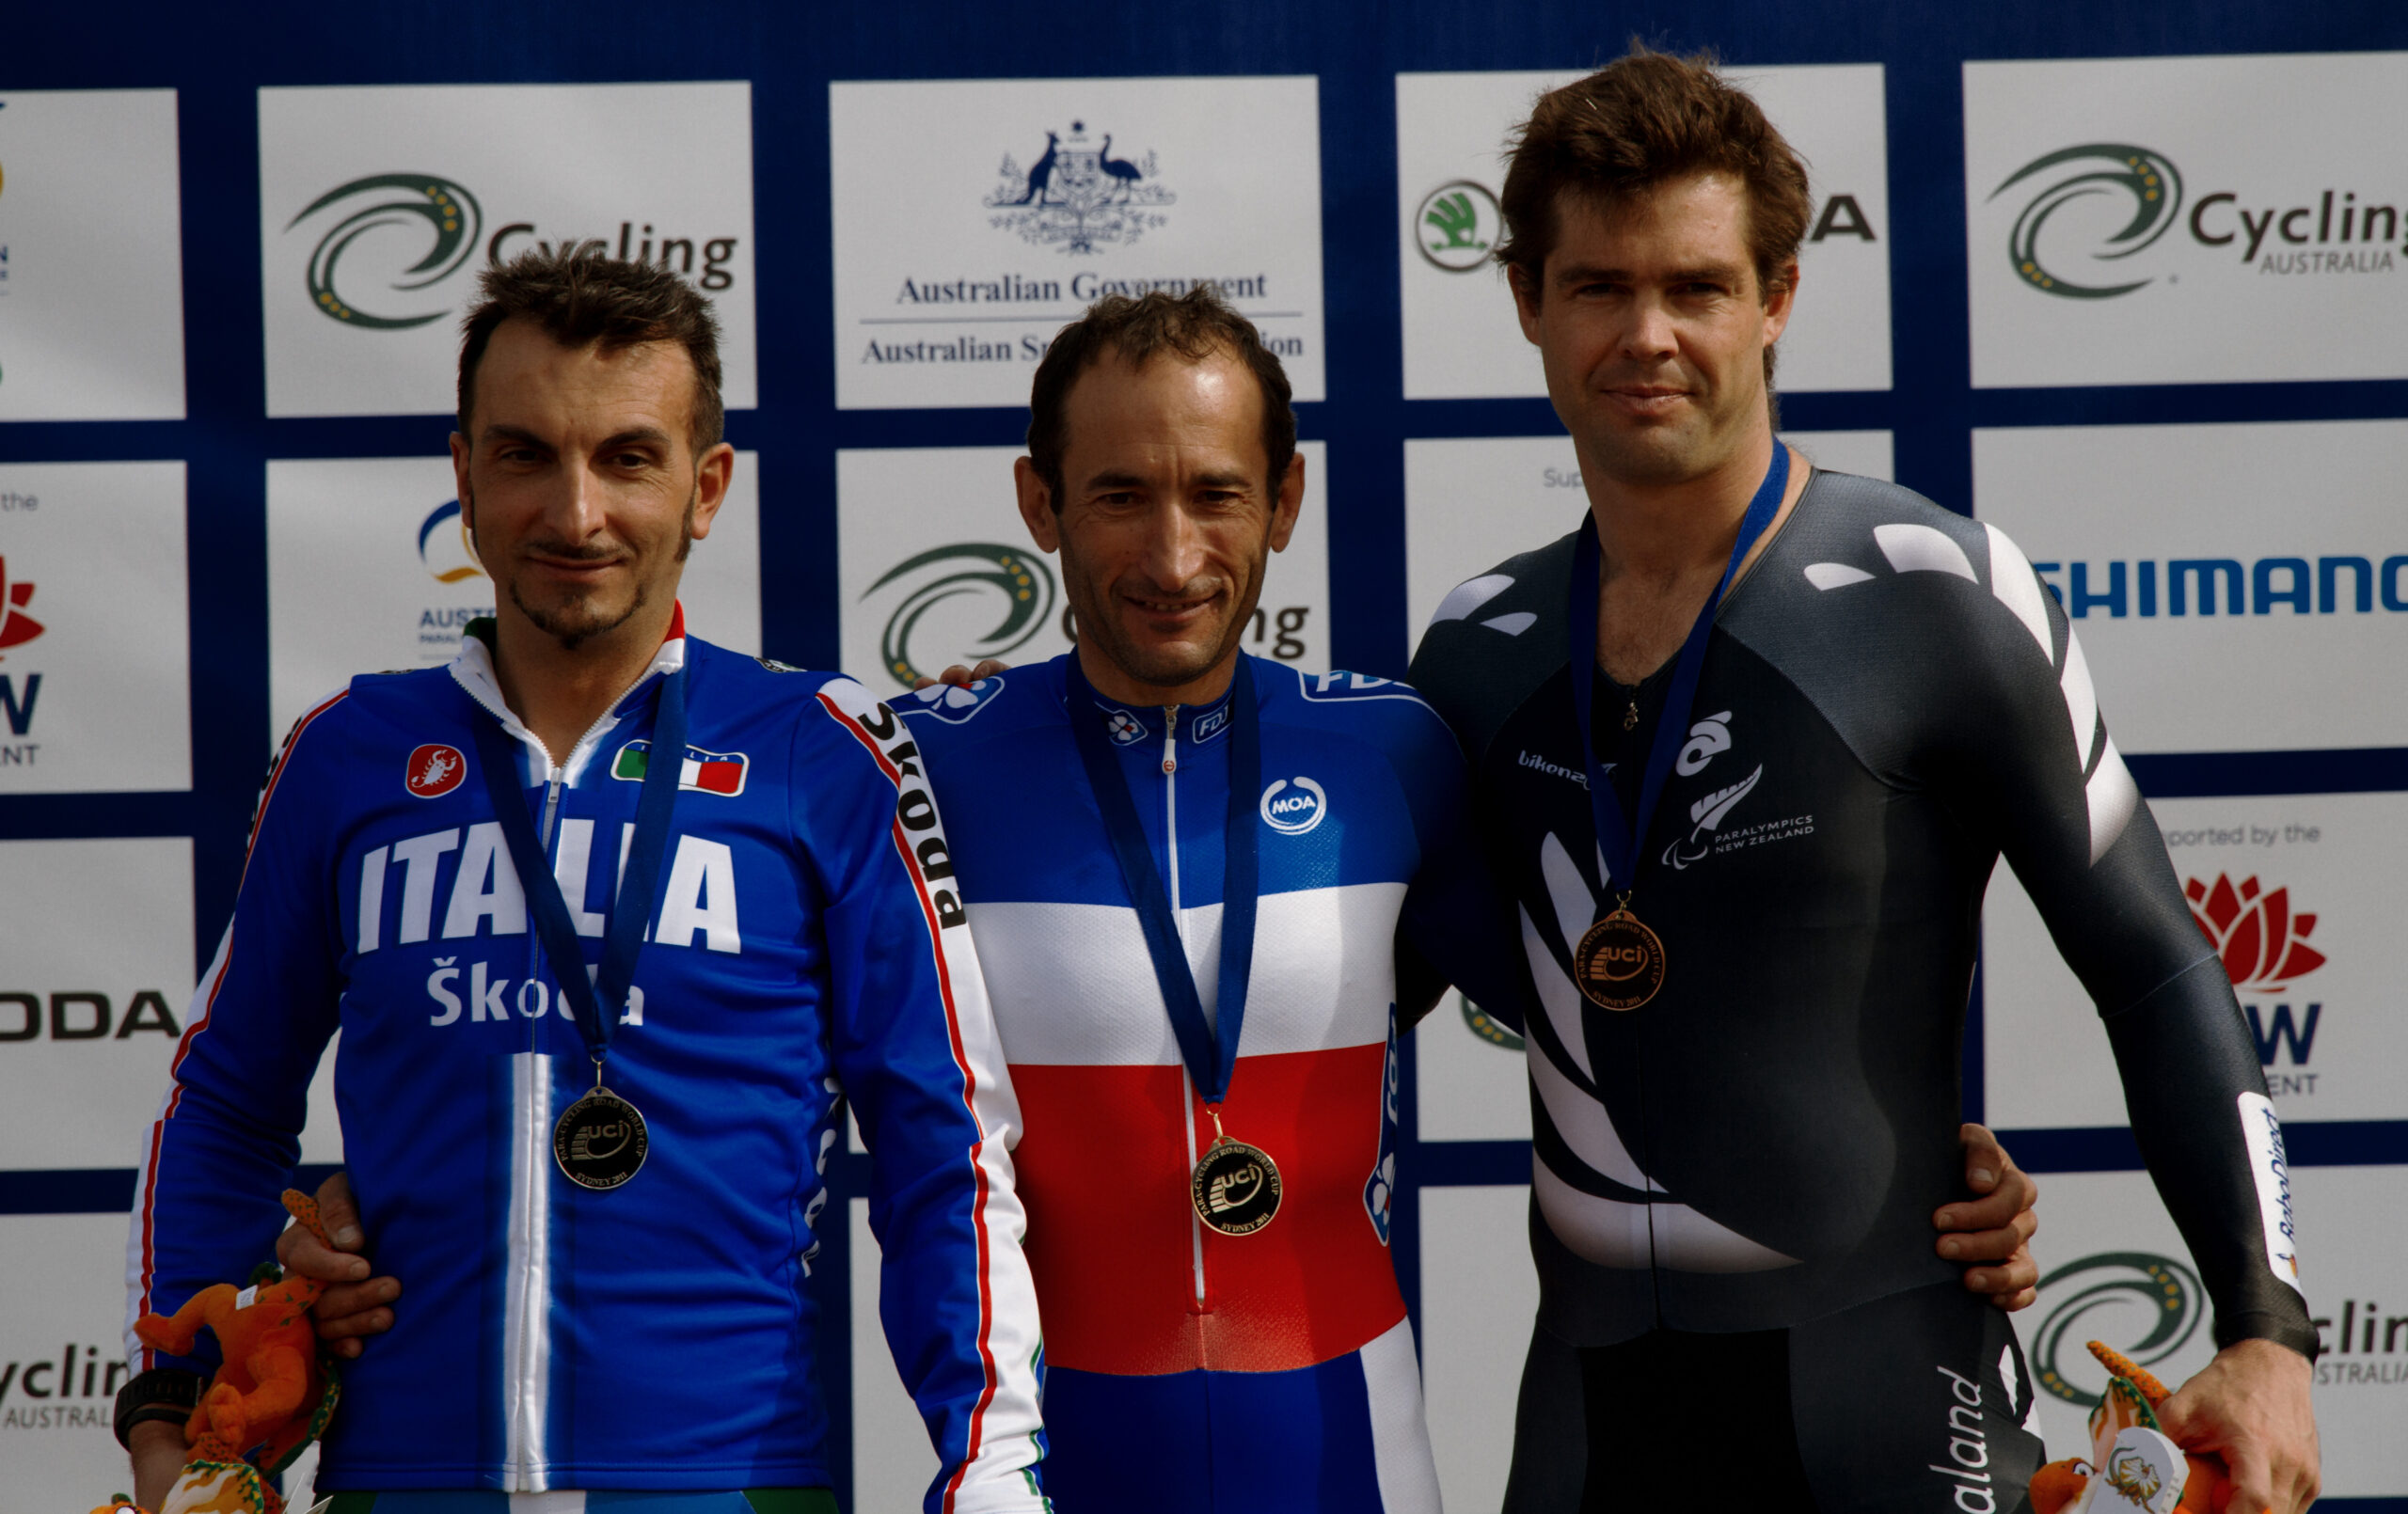 Three men cyclists stand on the podium